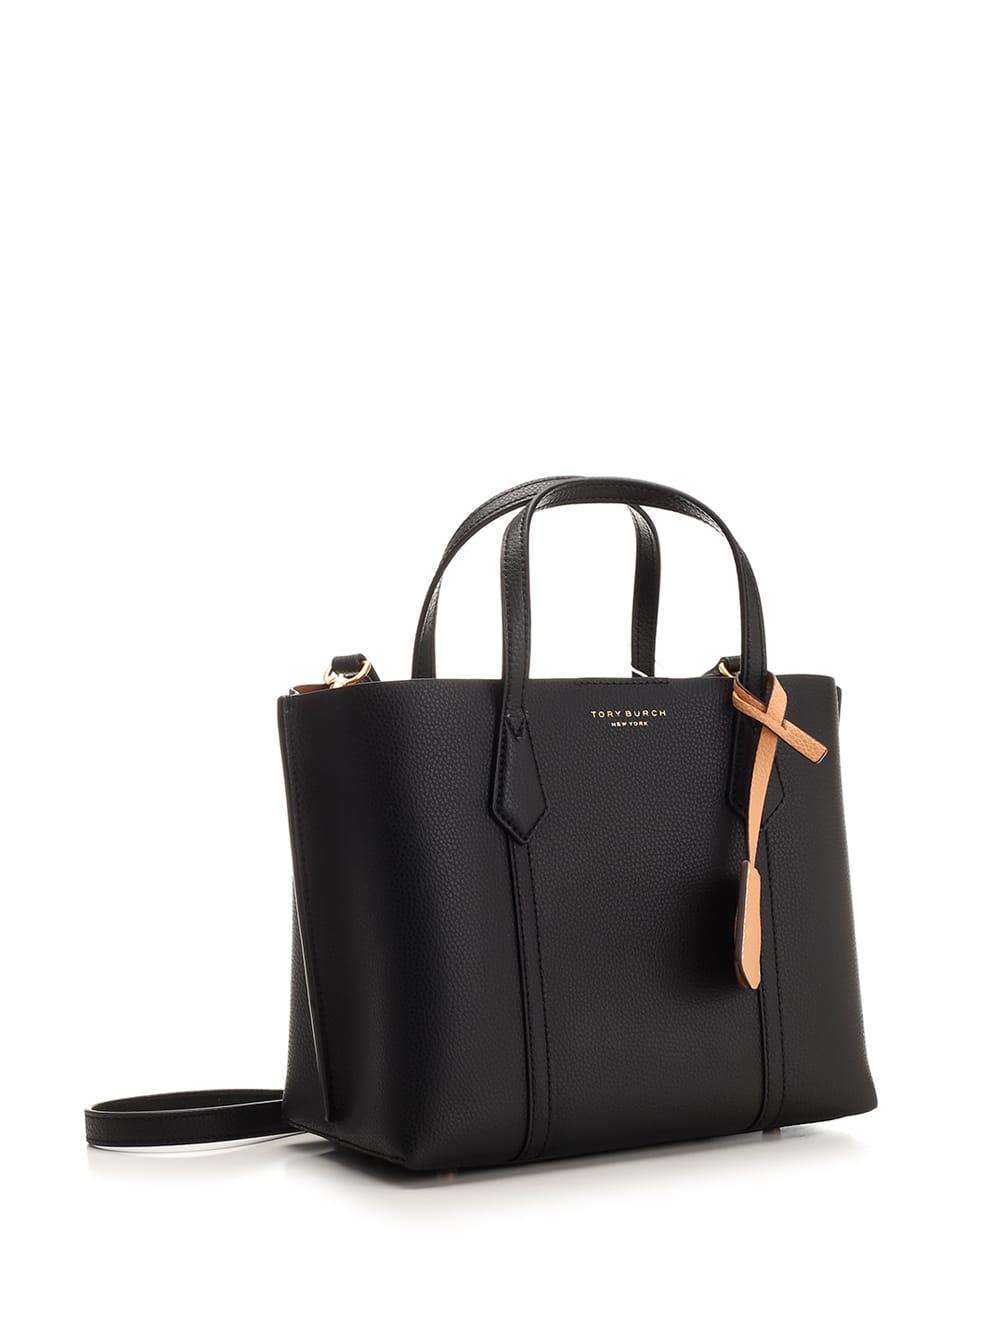 Tory Burch Small Perry Shopping Bag in Black